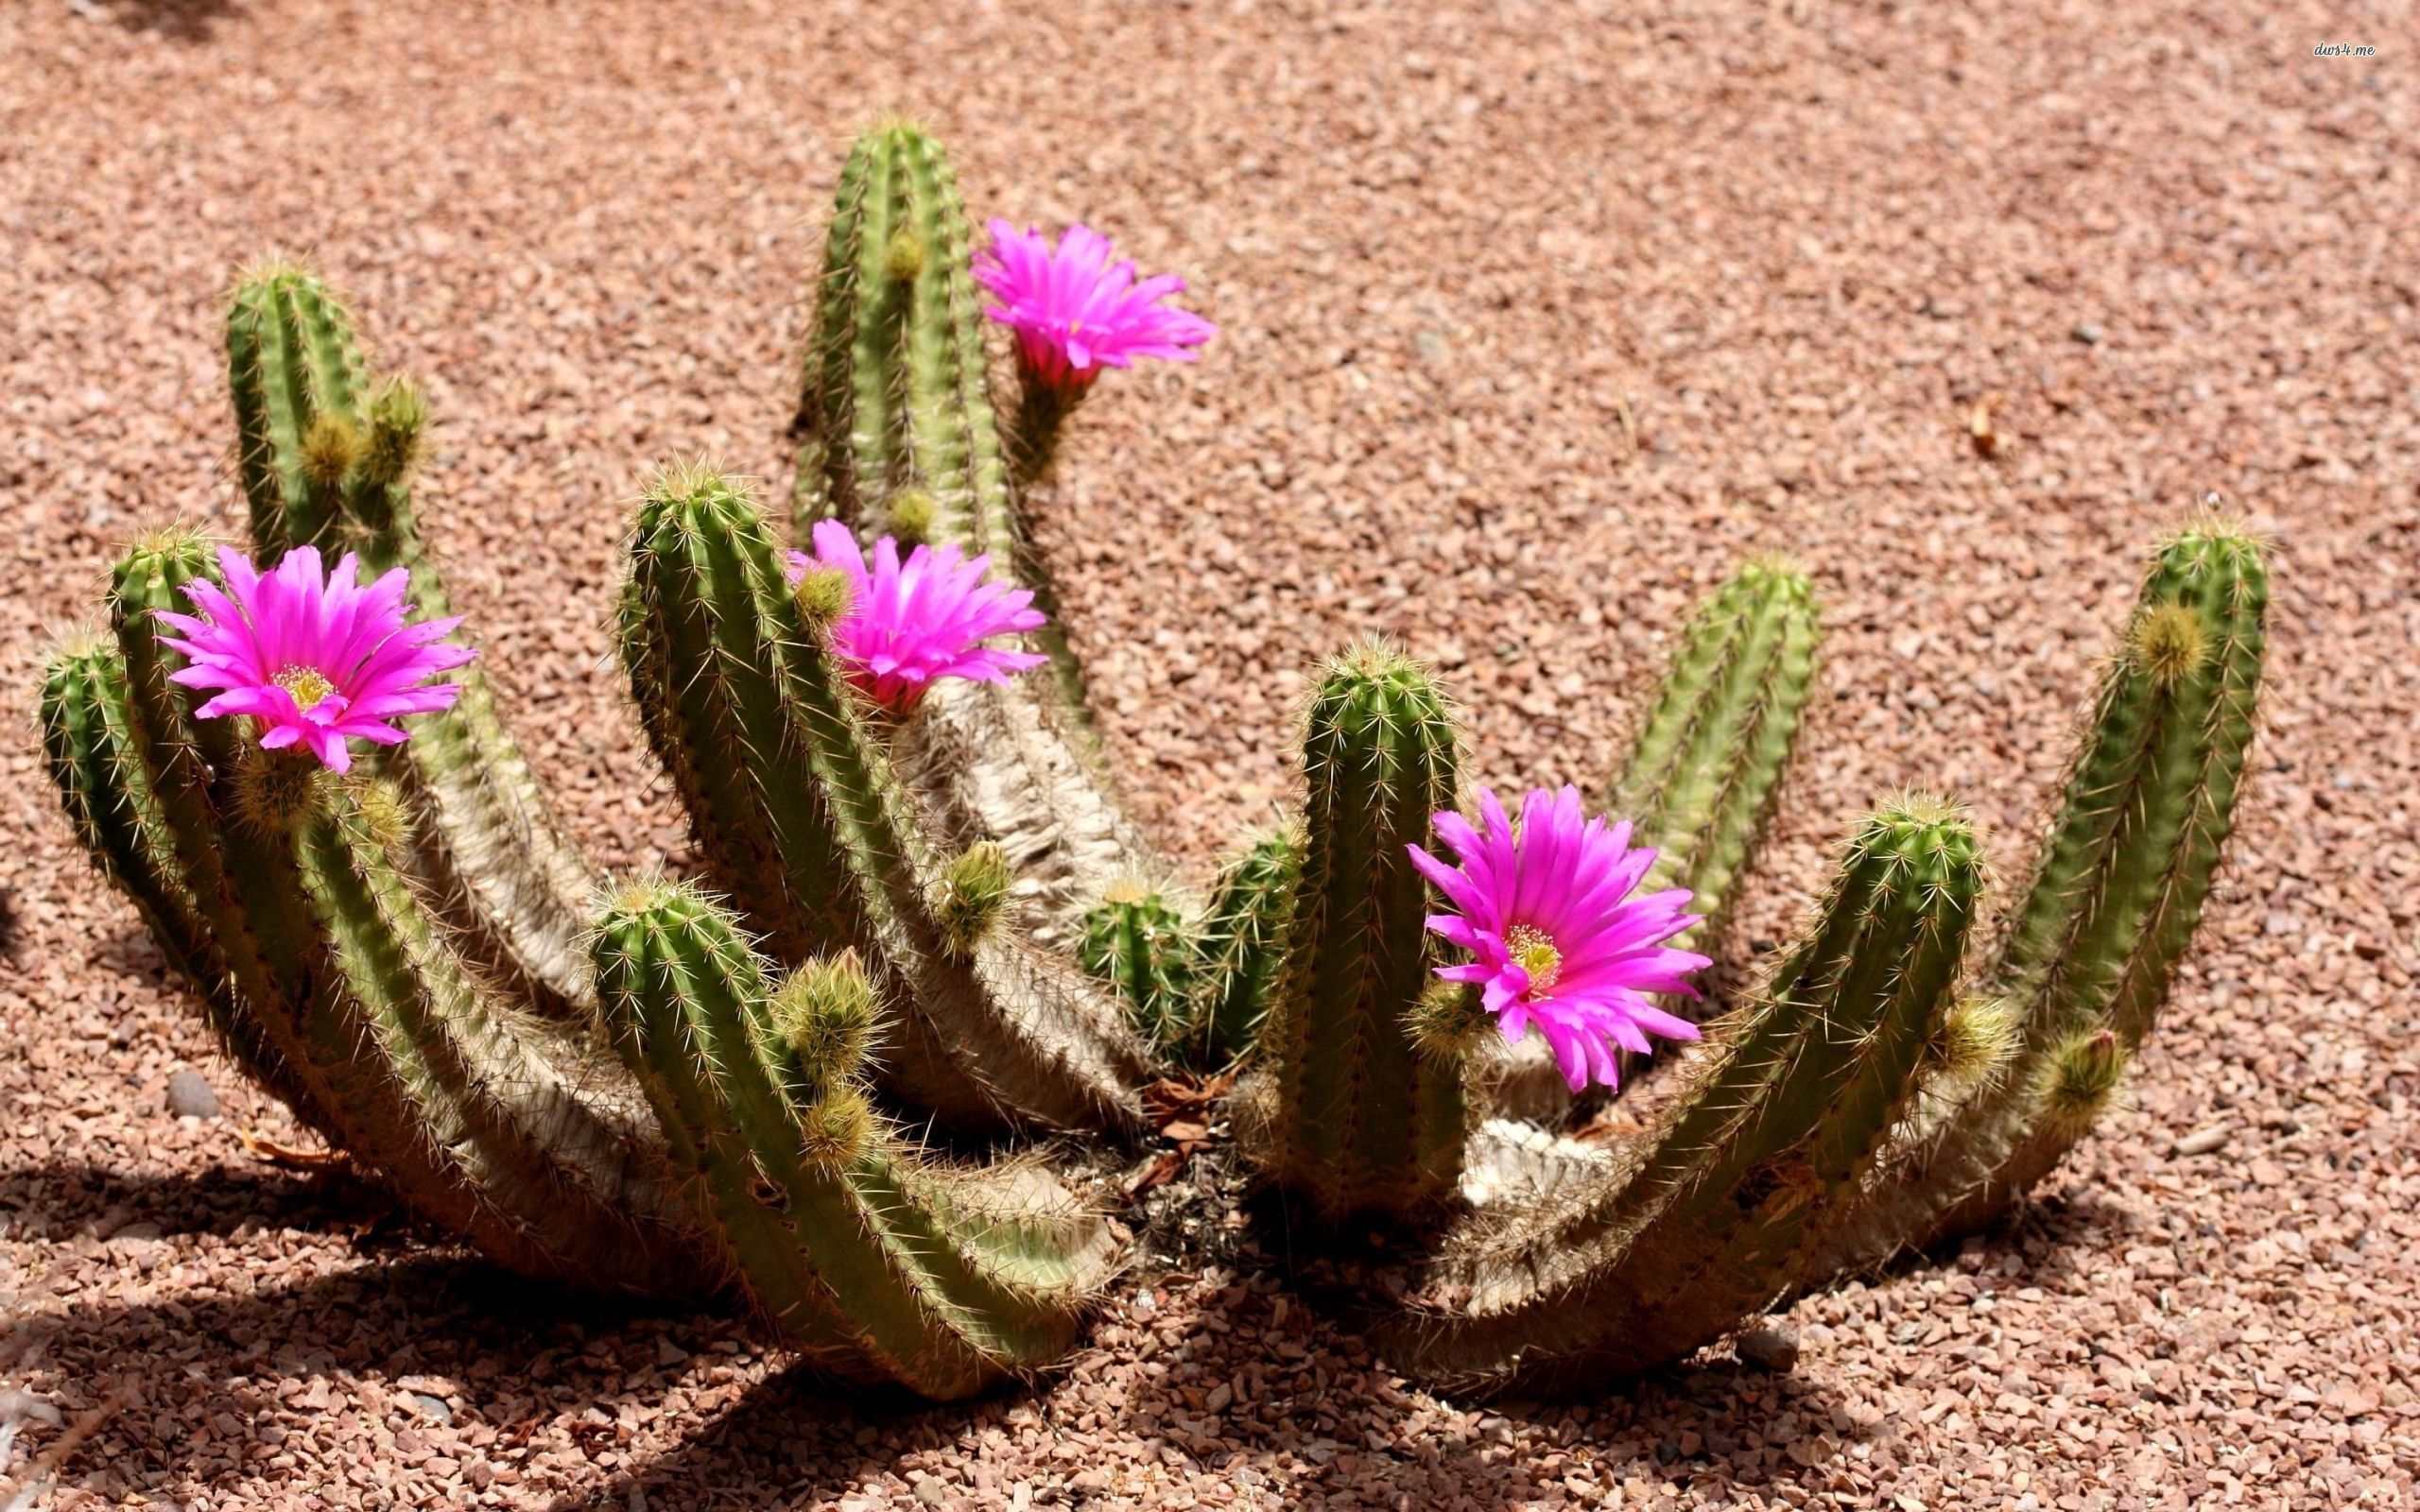 Cactus Flowers Wallpaper Background 59184 2560x1600 px ...